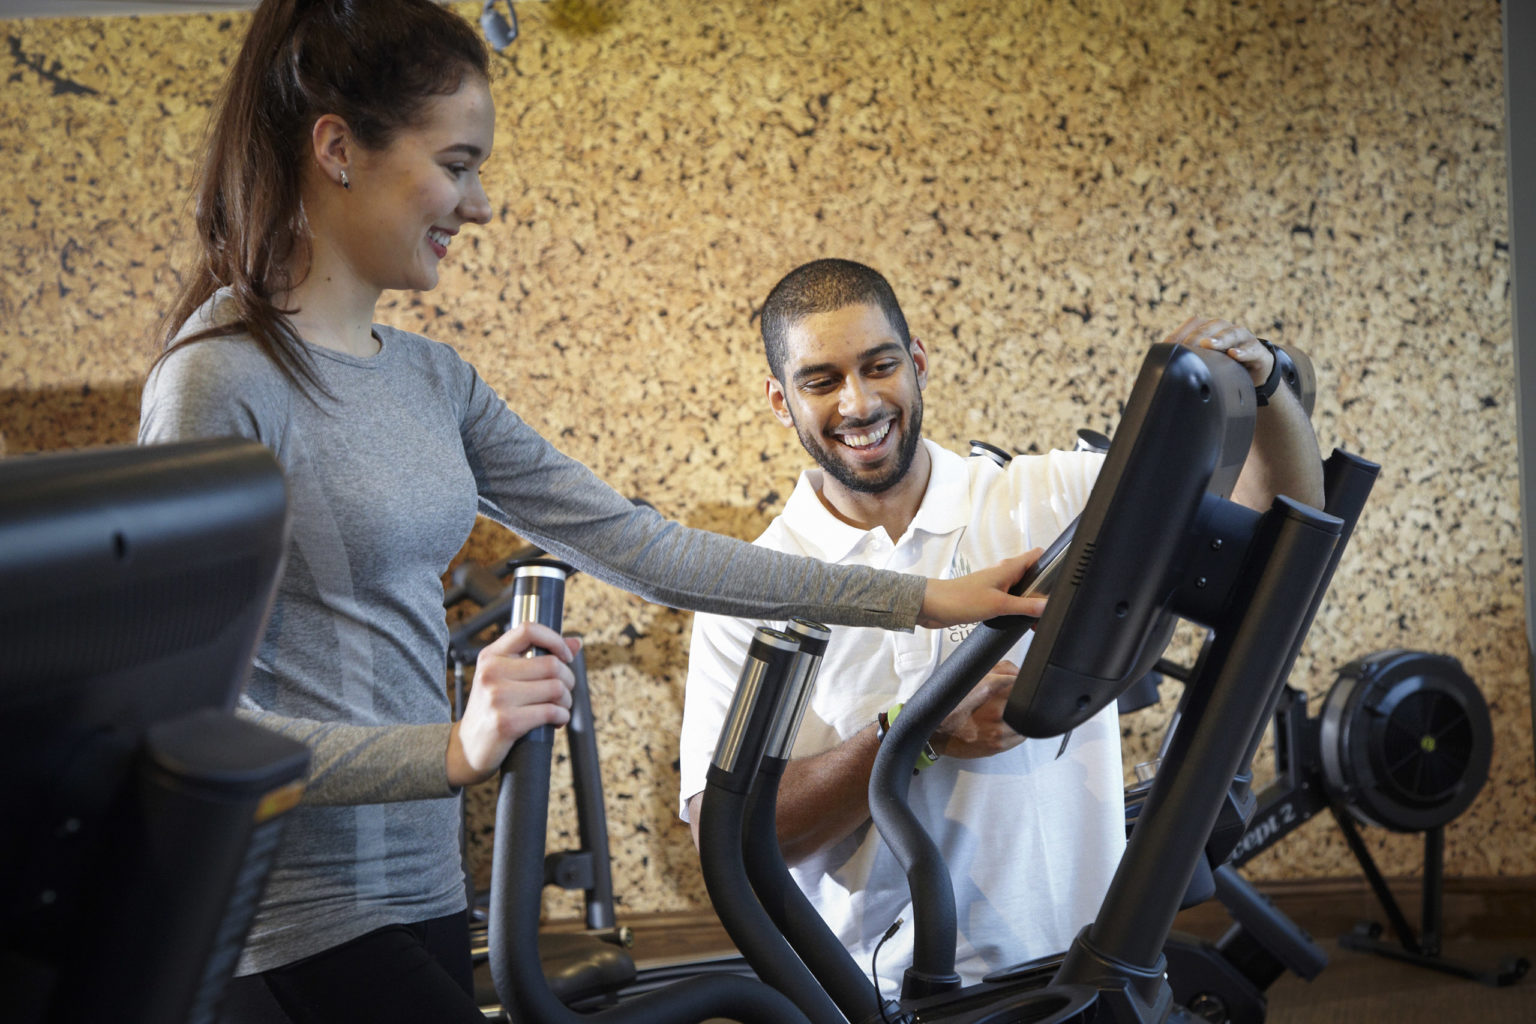 A personal trainer guiding someone on gym equipment at Swinton Country Club and Spa near Masham and Ripon